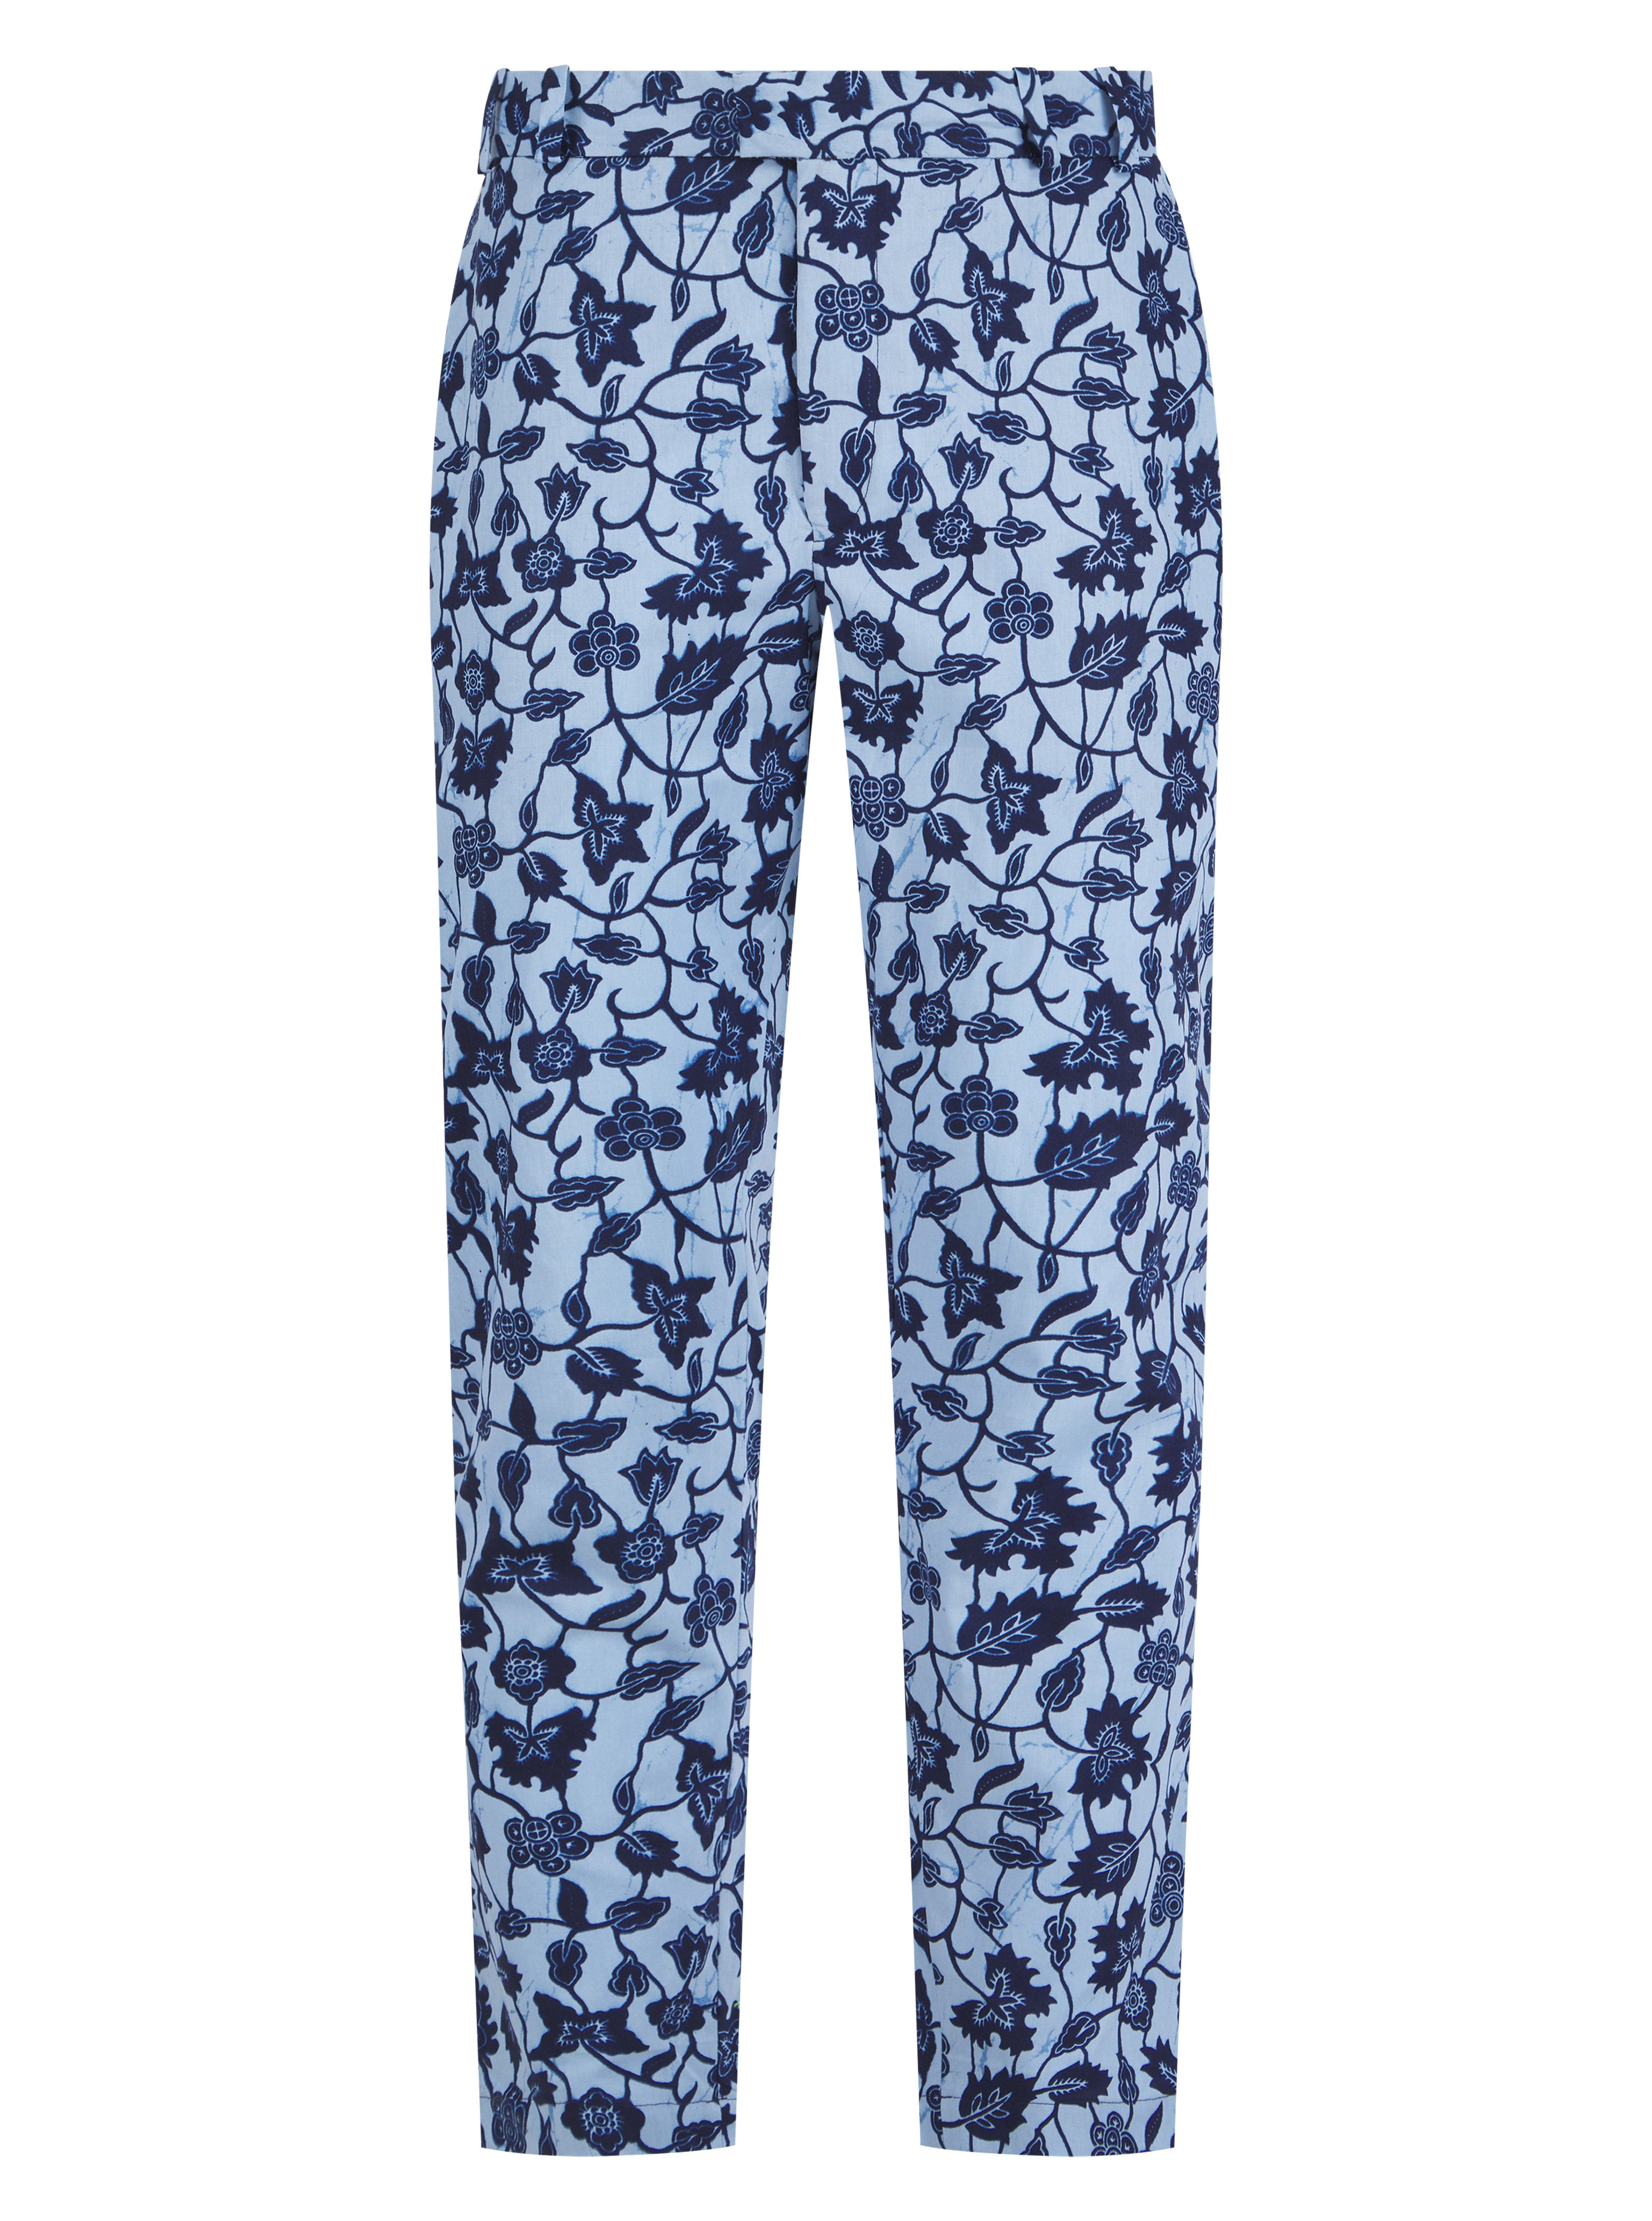 Fluid Cropped Trousers with Floral Print, for Girls - green dark all over  printed, Girls